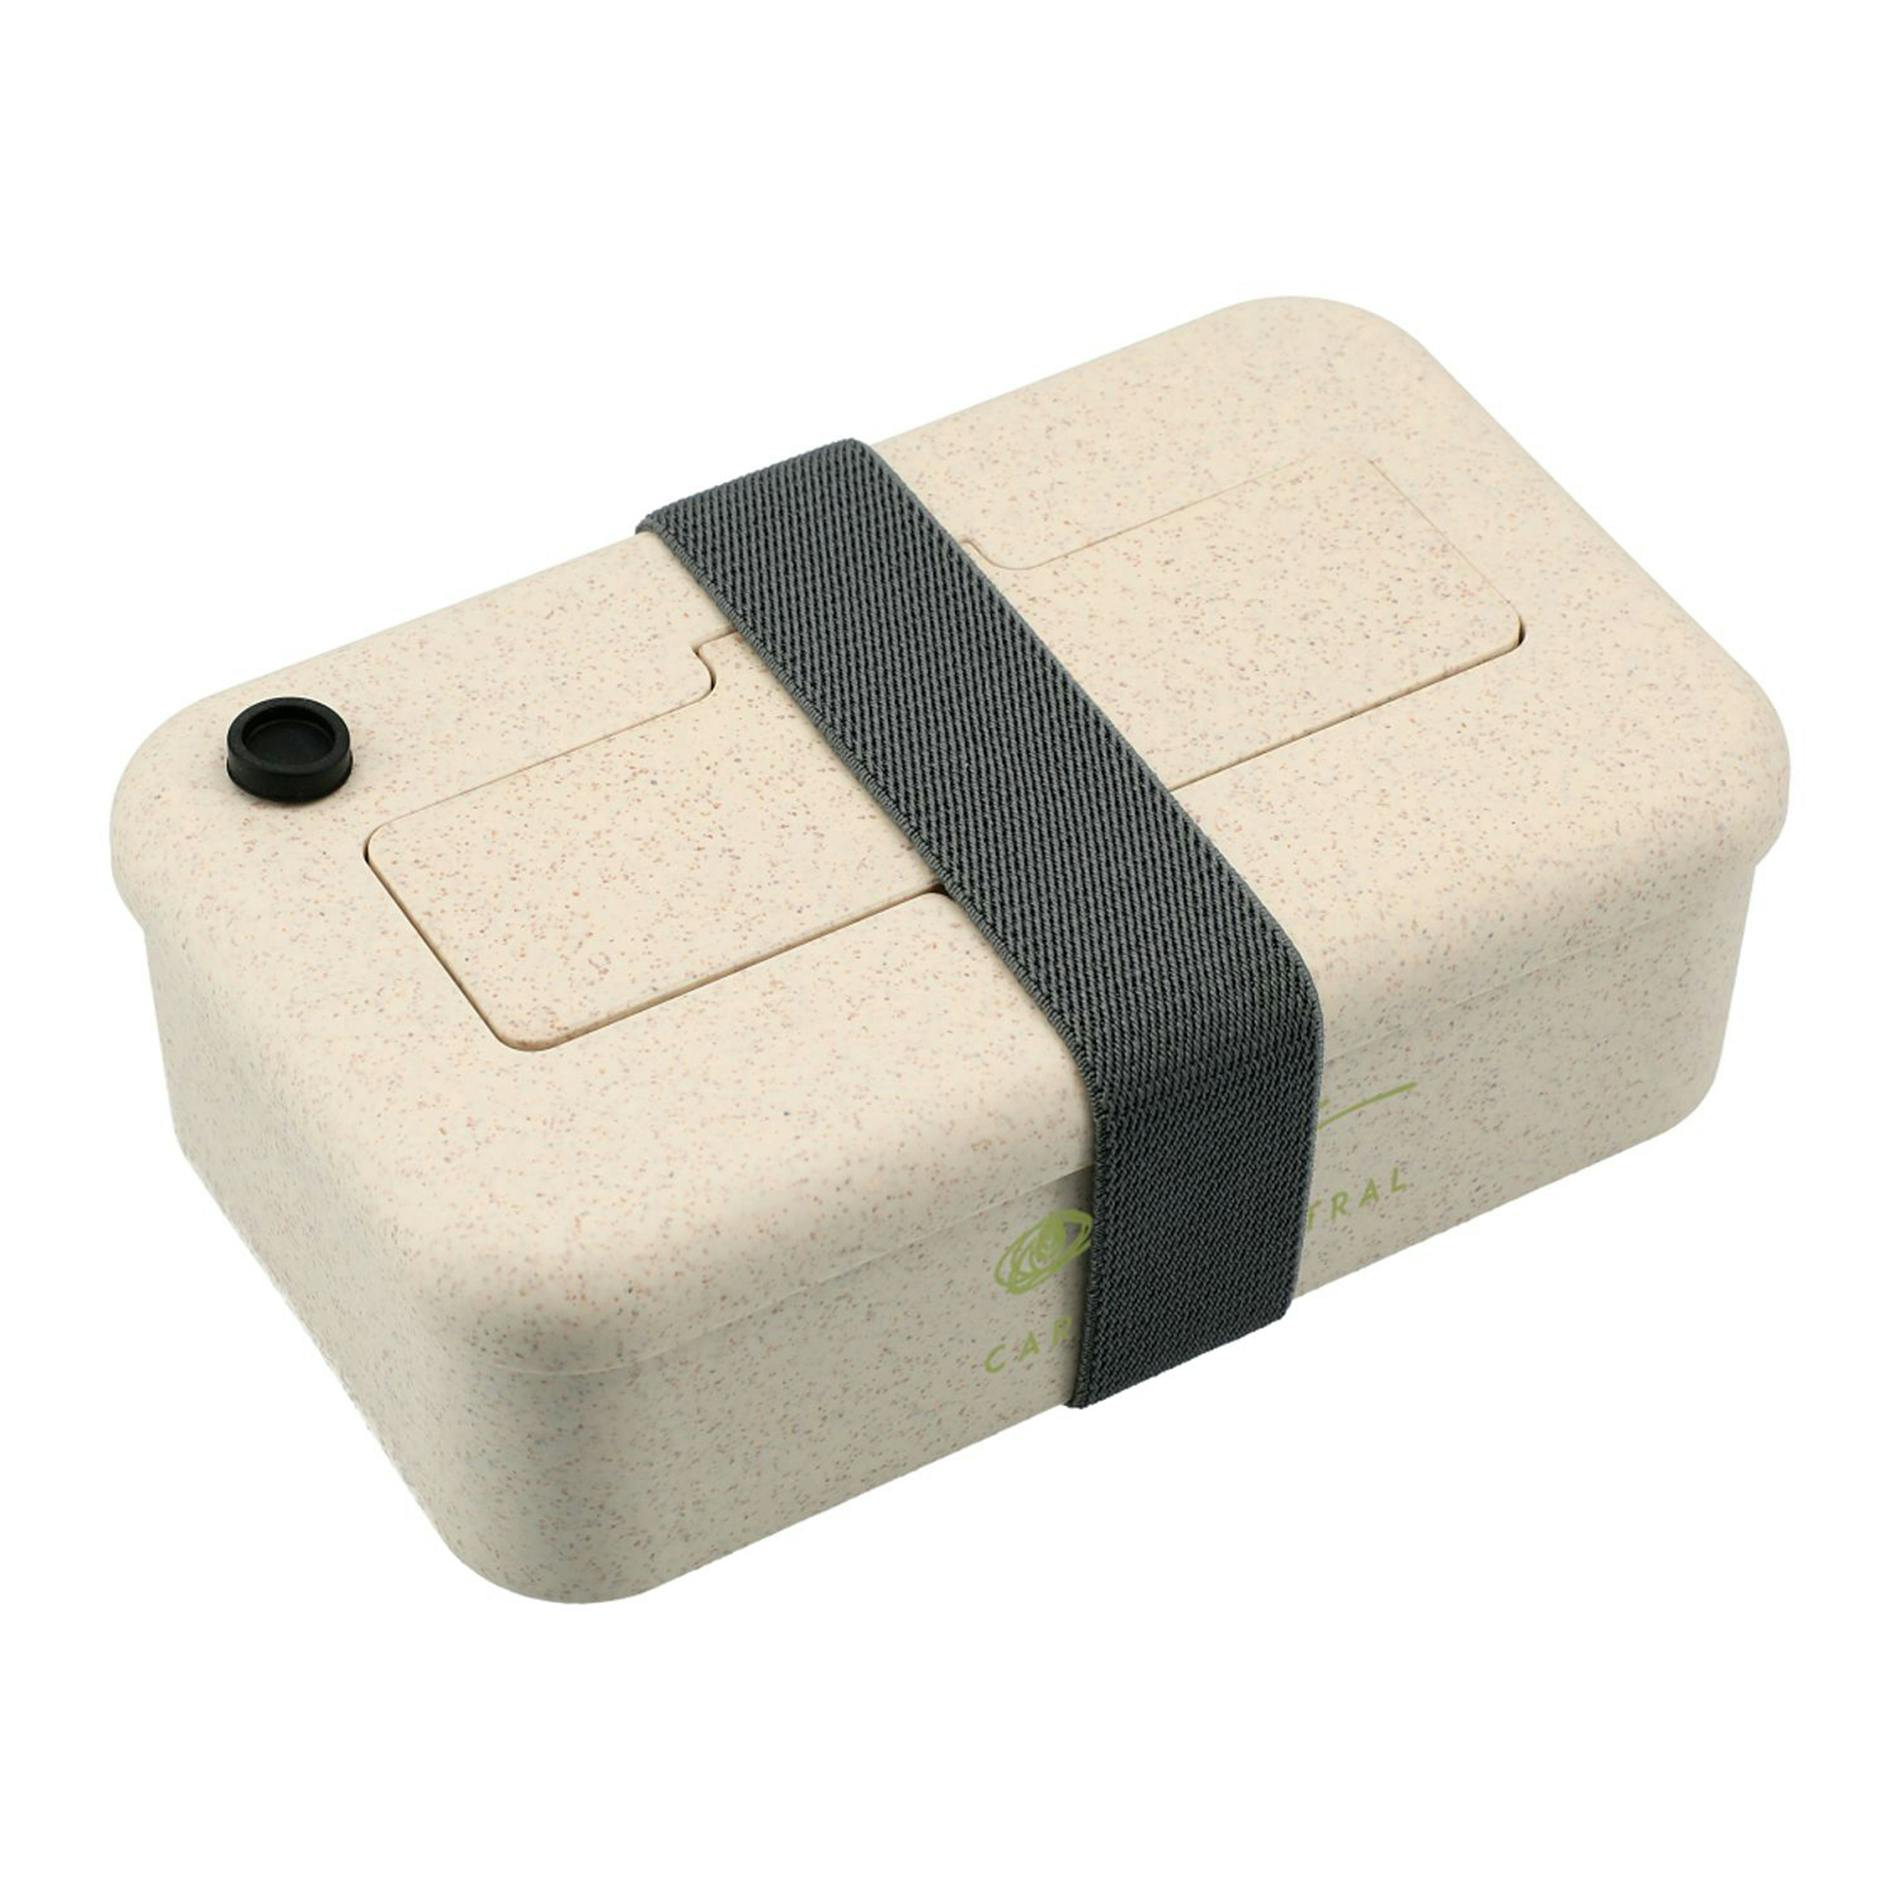 Bamboo Fiber Lunch Box with Utensils - additional Image 3